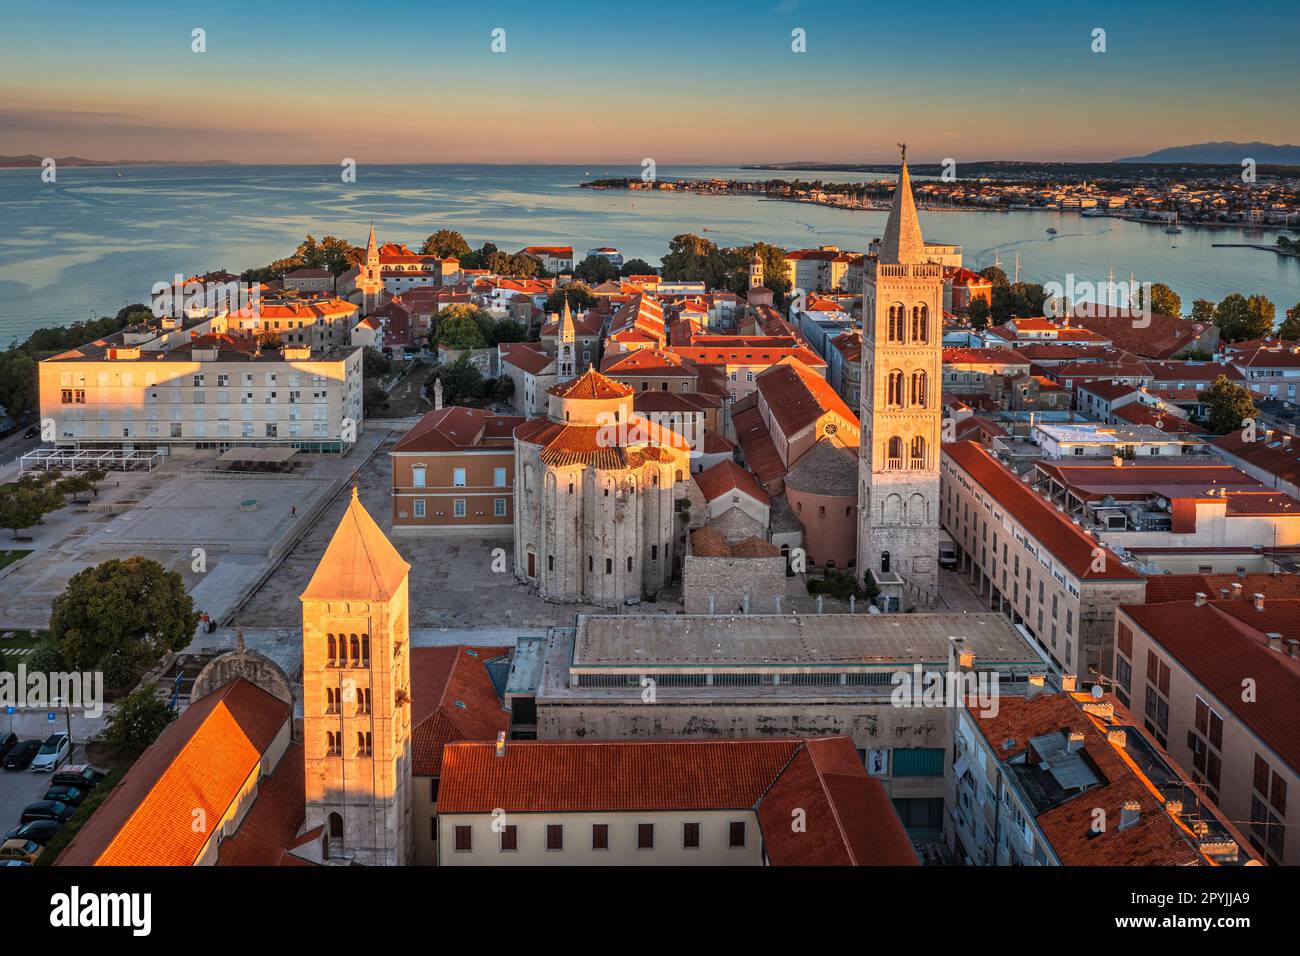 Zadar, Croatia - Aerial view of the old town of Zadar by the Adriatic sea with Church of St. Donatus and the Cathedral of St. Anastasia and blue sky Stock Photo